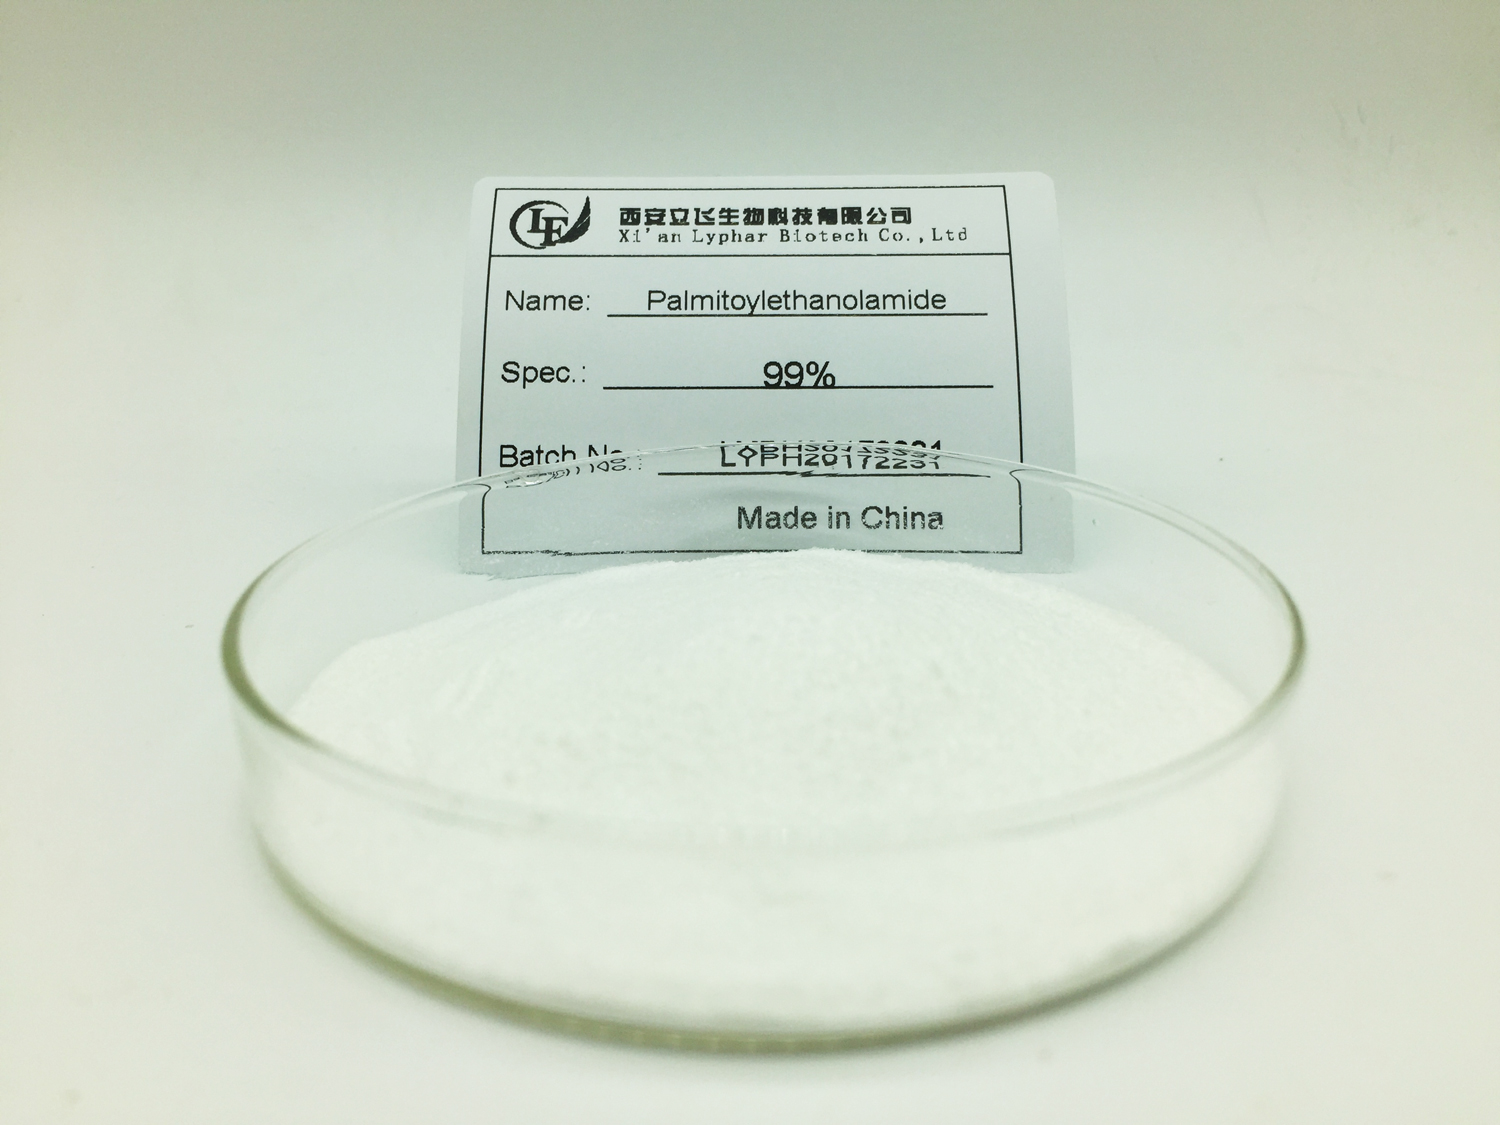 The application of Palmitoylethanolamide-Xi'an Lyphar Biotech Co., Ltd